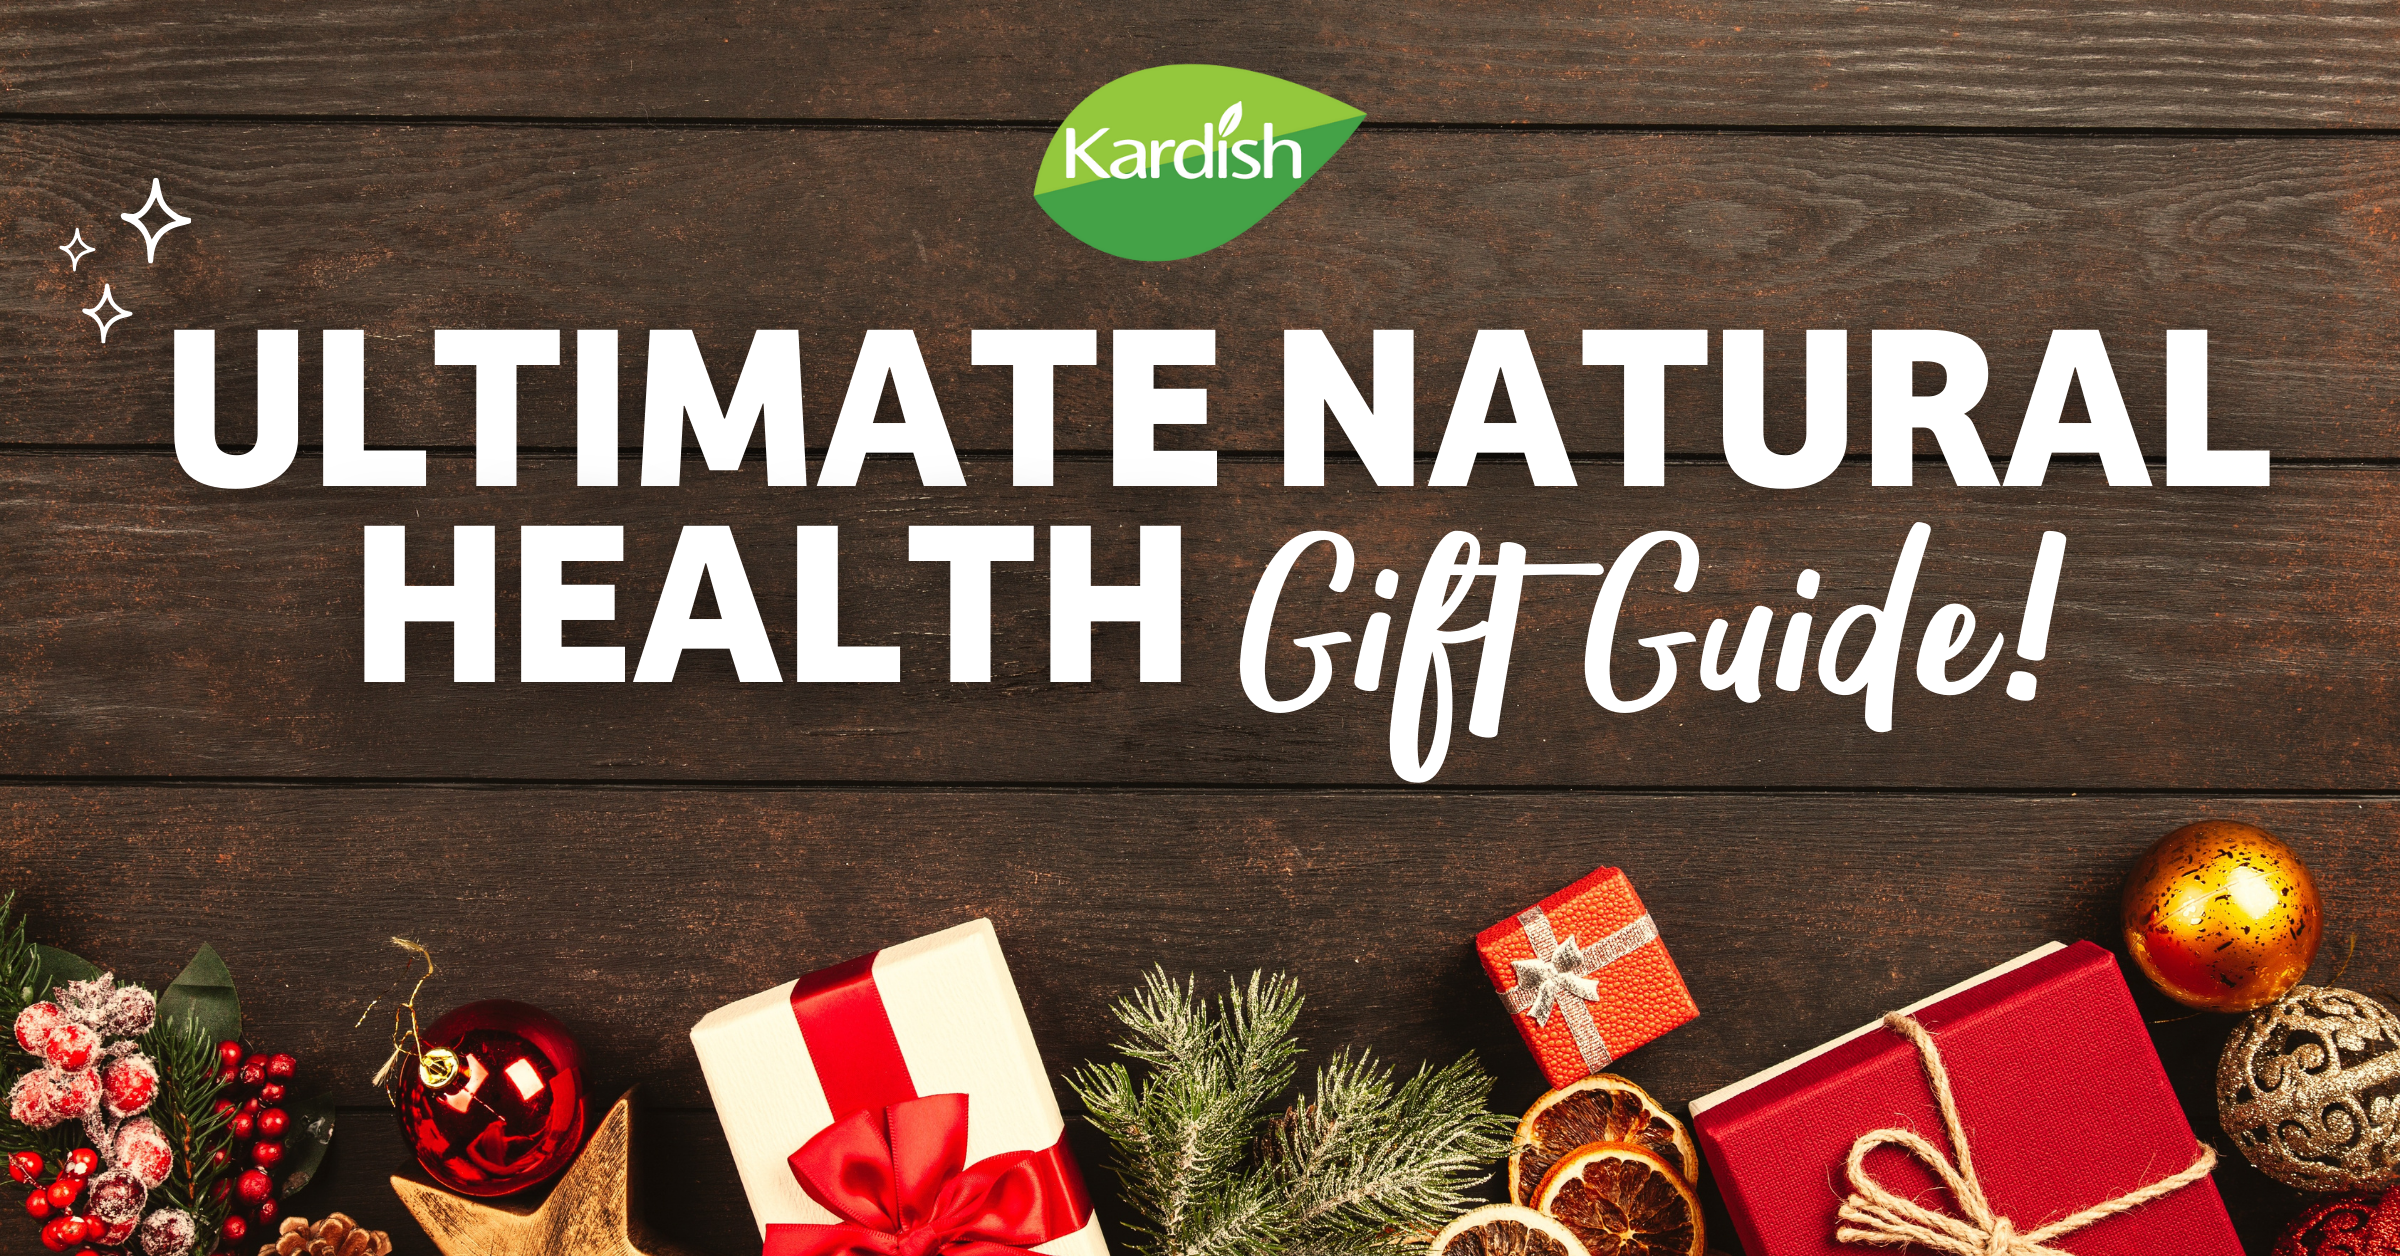 The 2023 Kardish Ultimate Natural Health Gift Guide is here!